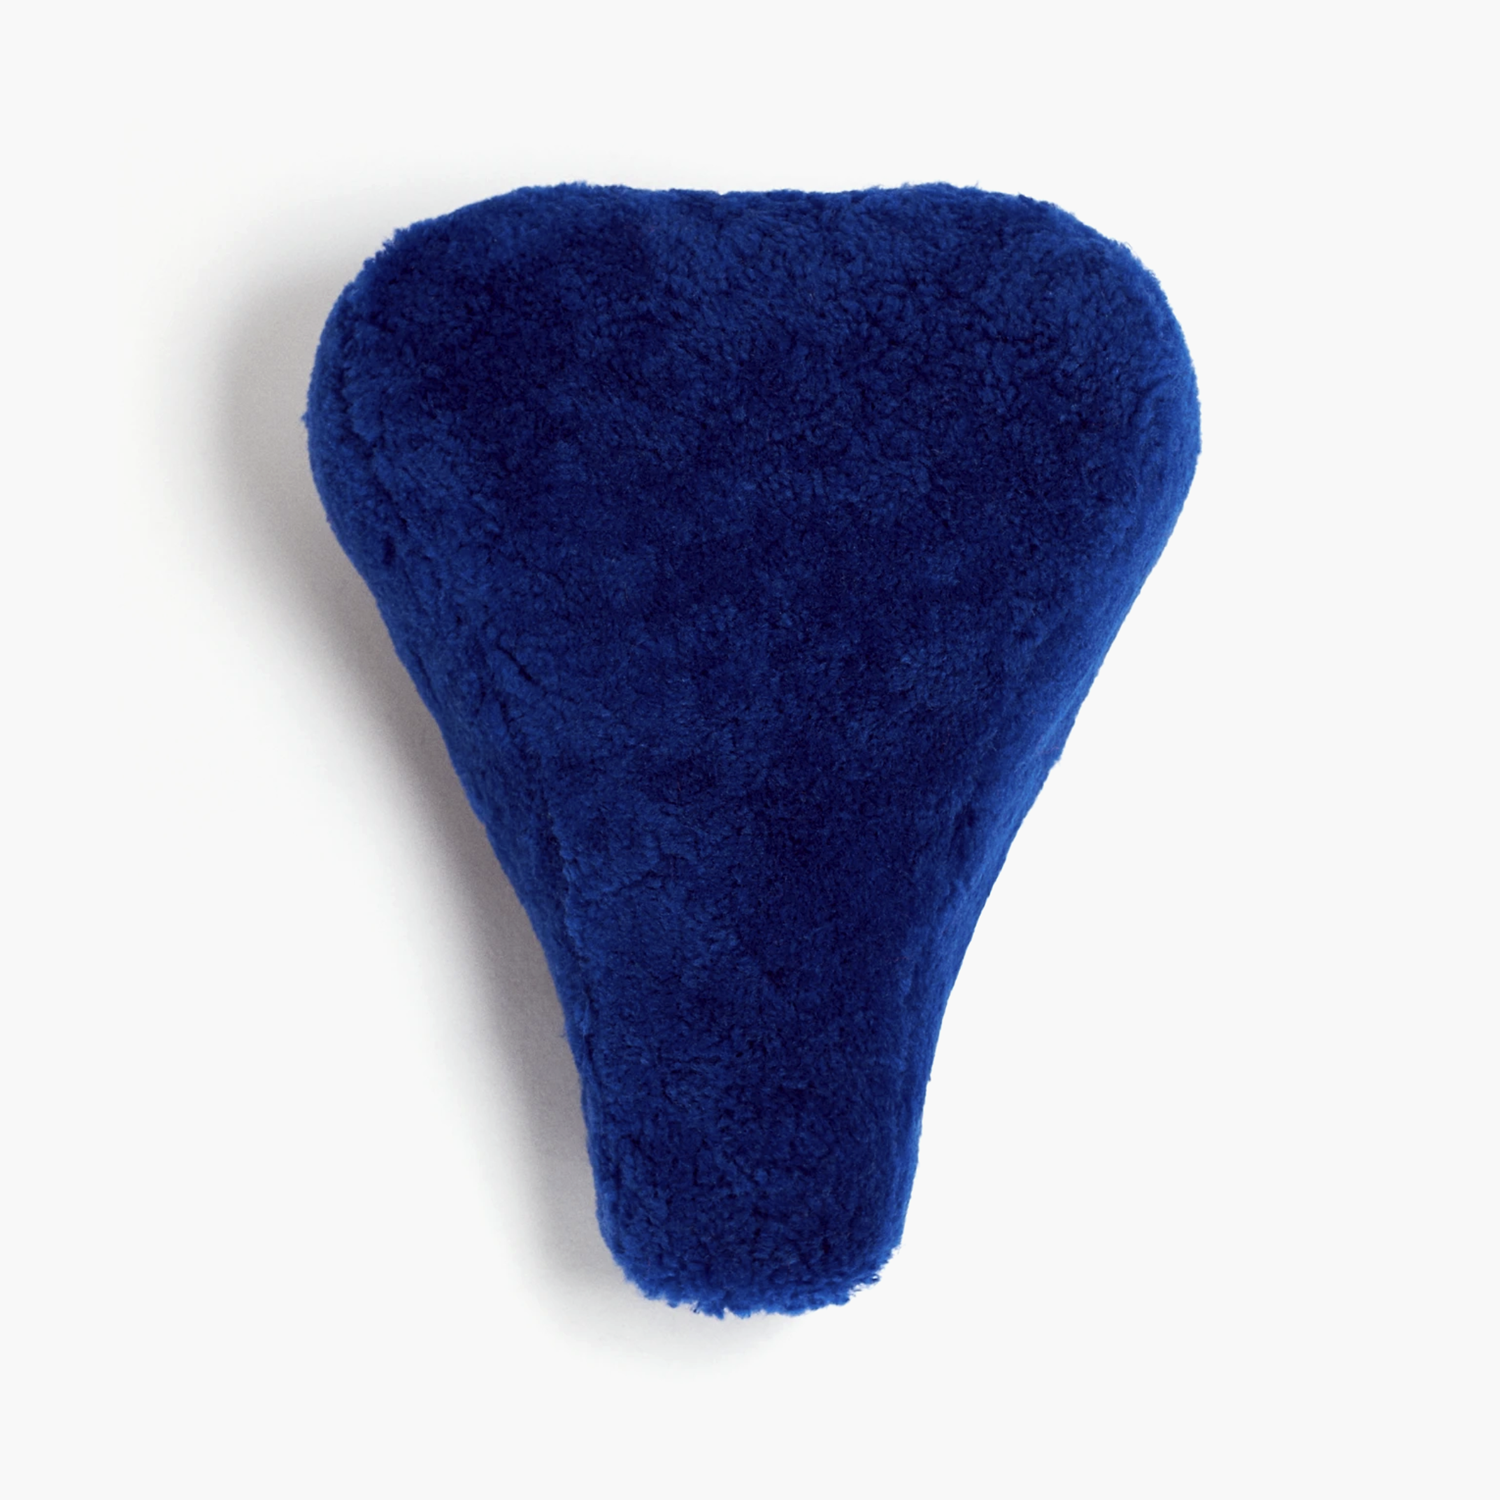 Toasties Sheepskin Bicycle Seat Cover Royal Blue